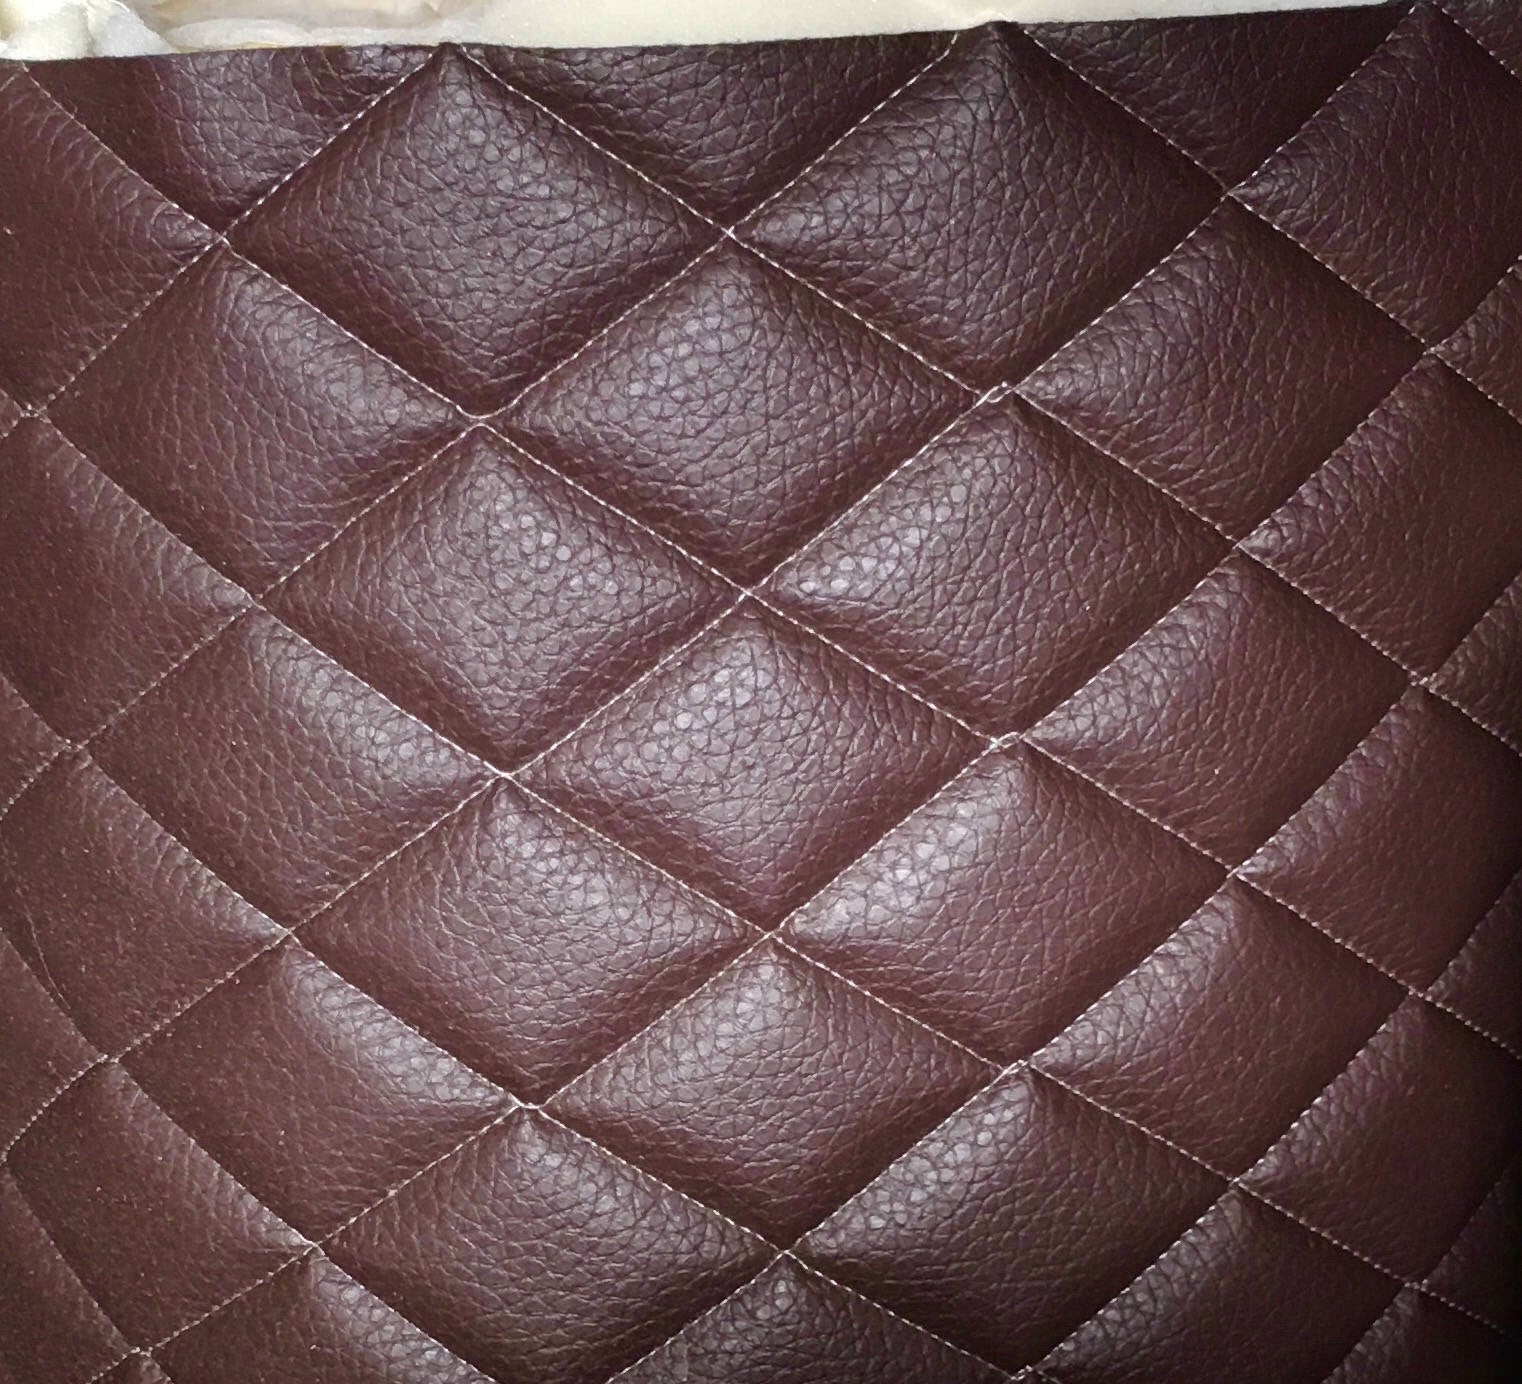 Chocolate Diamond Quilted Faux Leather Vinyl 3/8 Foam Backing 54